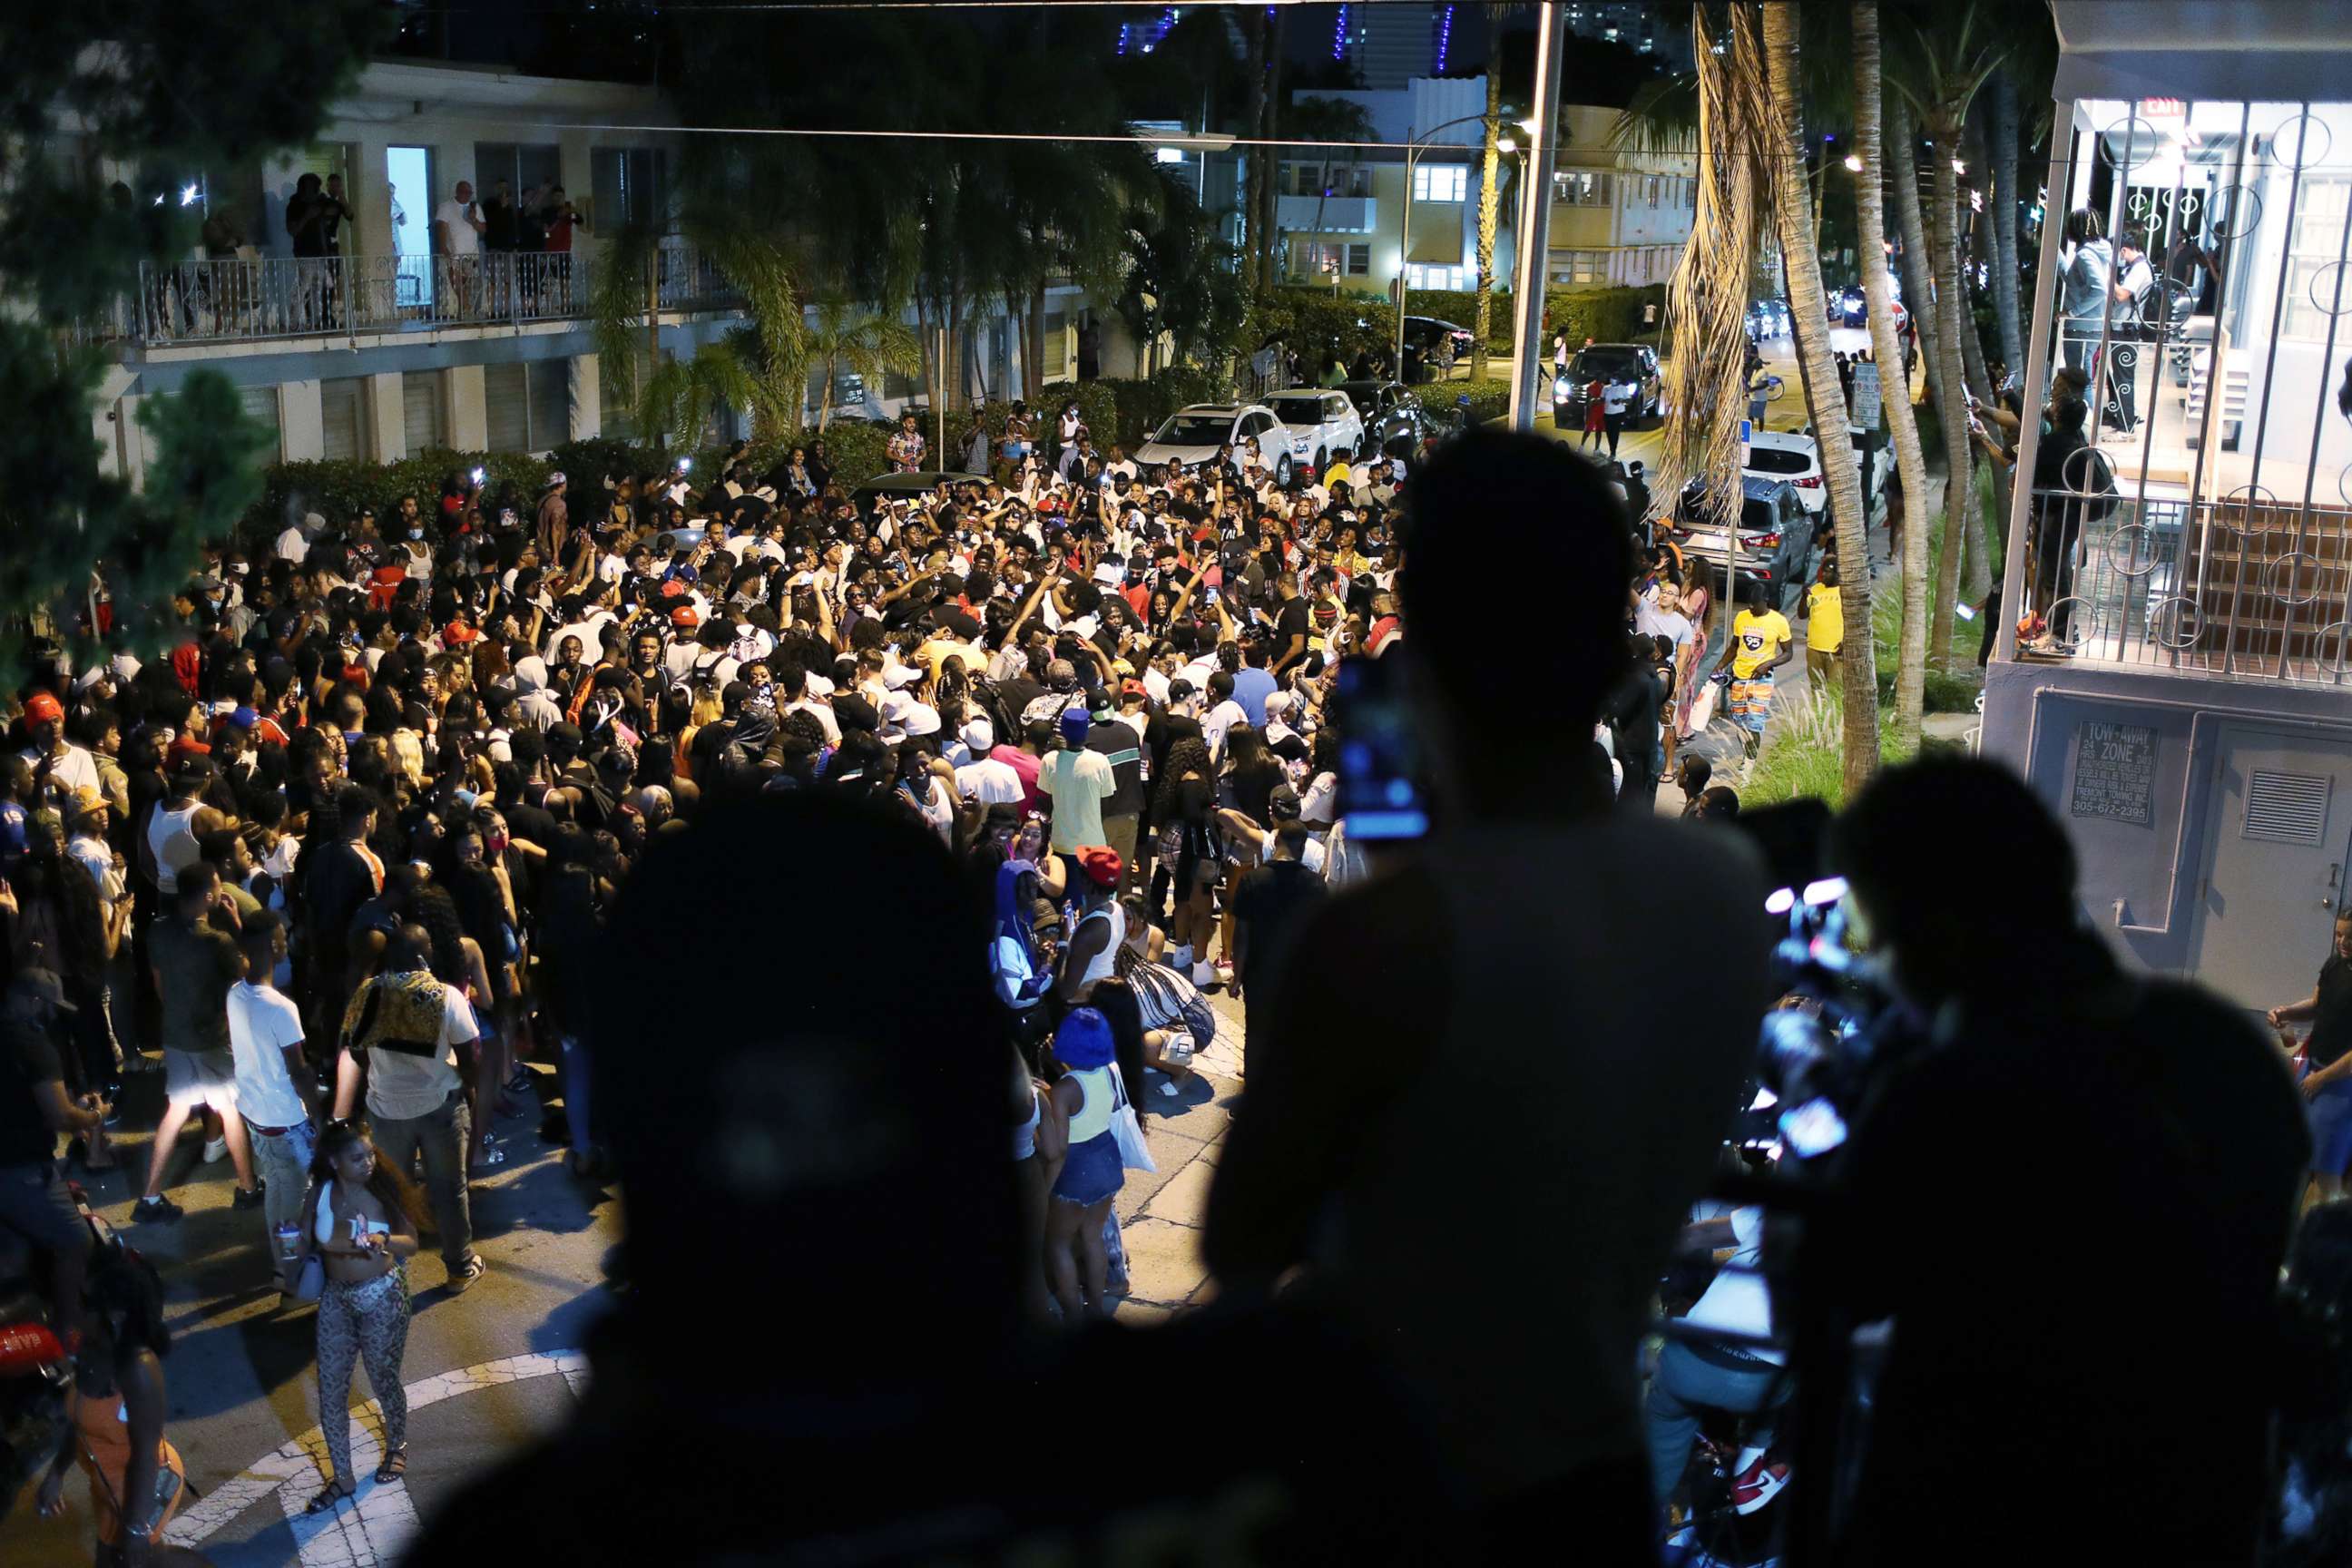 PHOTO: A crowd exits the area as an 8pm curfew goes into effect on March 21, 2021, in Miami Beach, Fla.